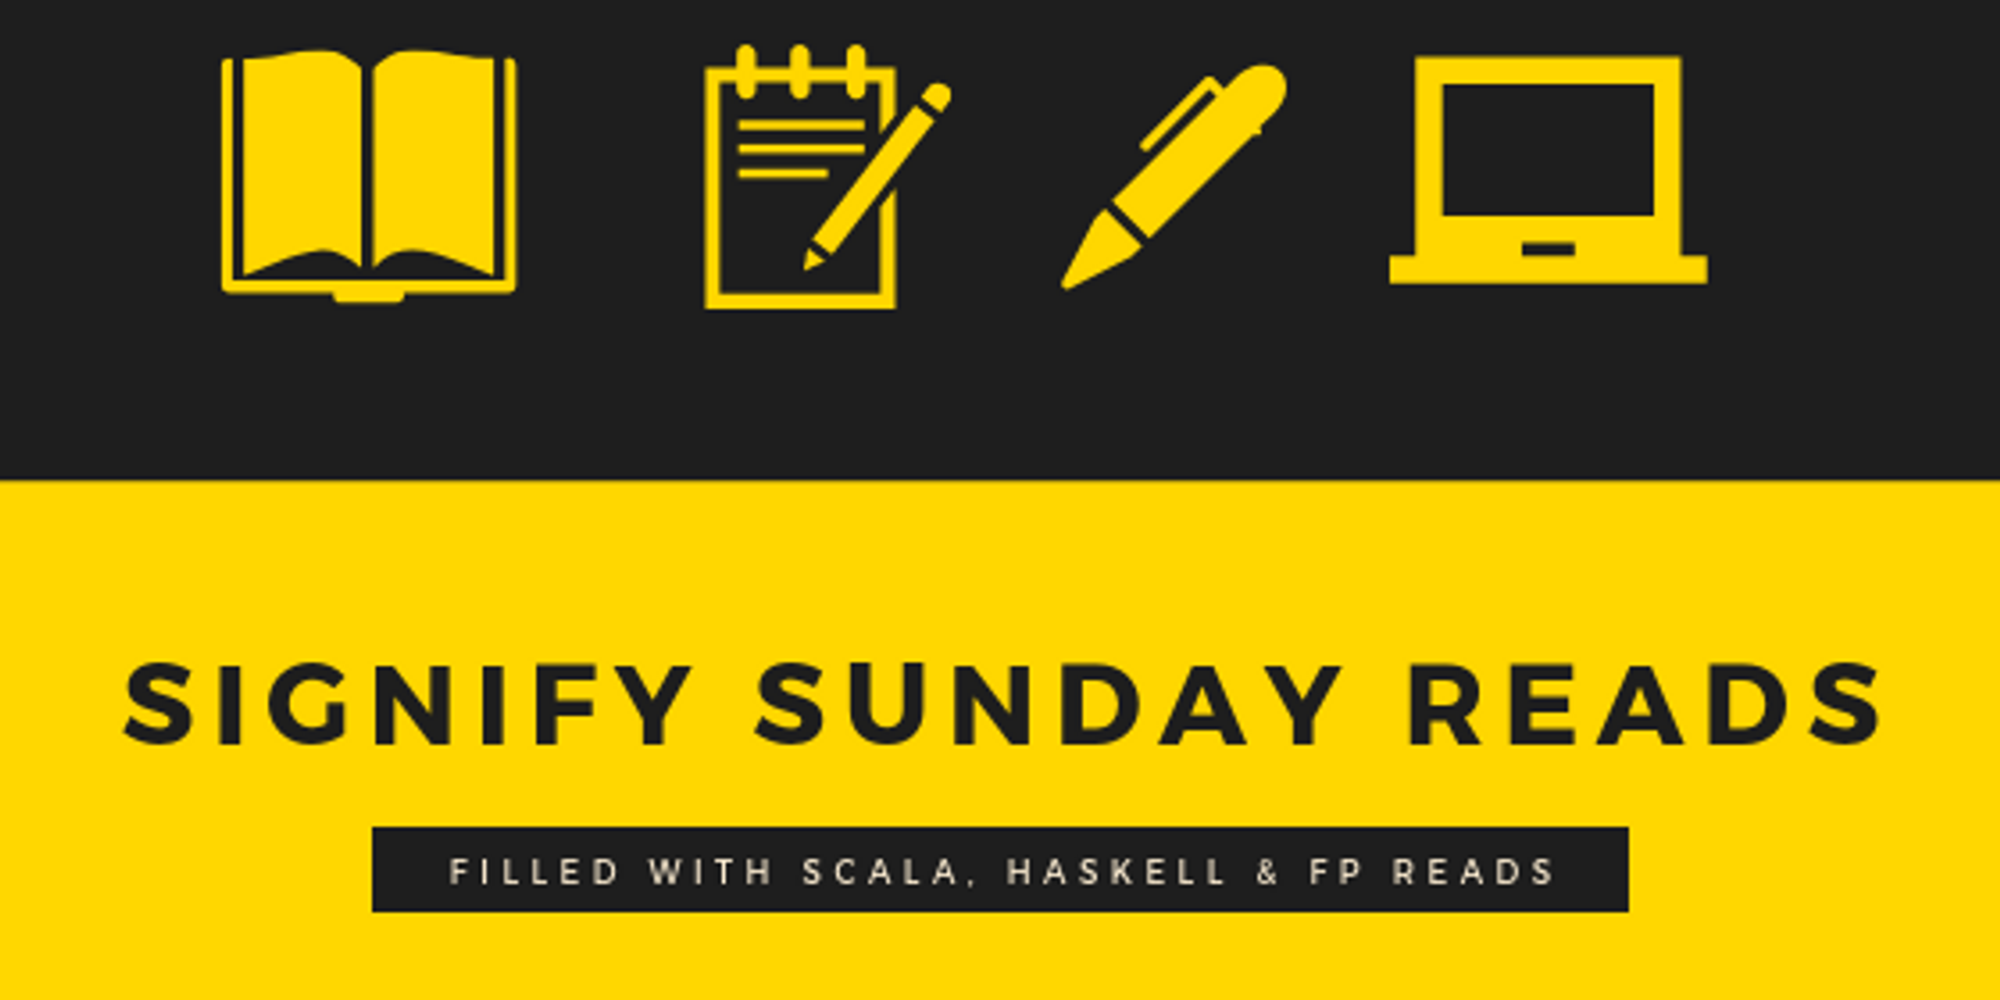 Signify Sunday Reads